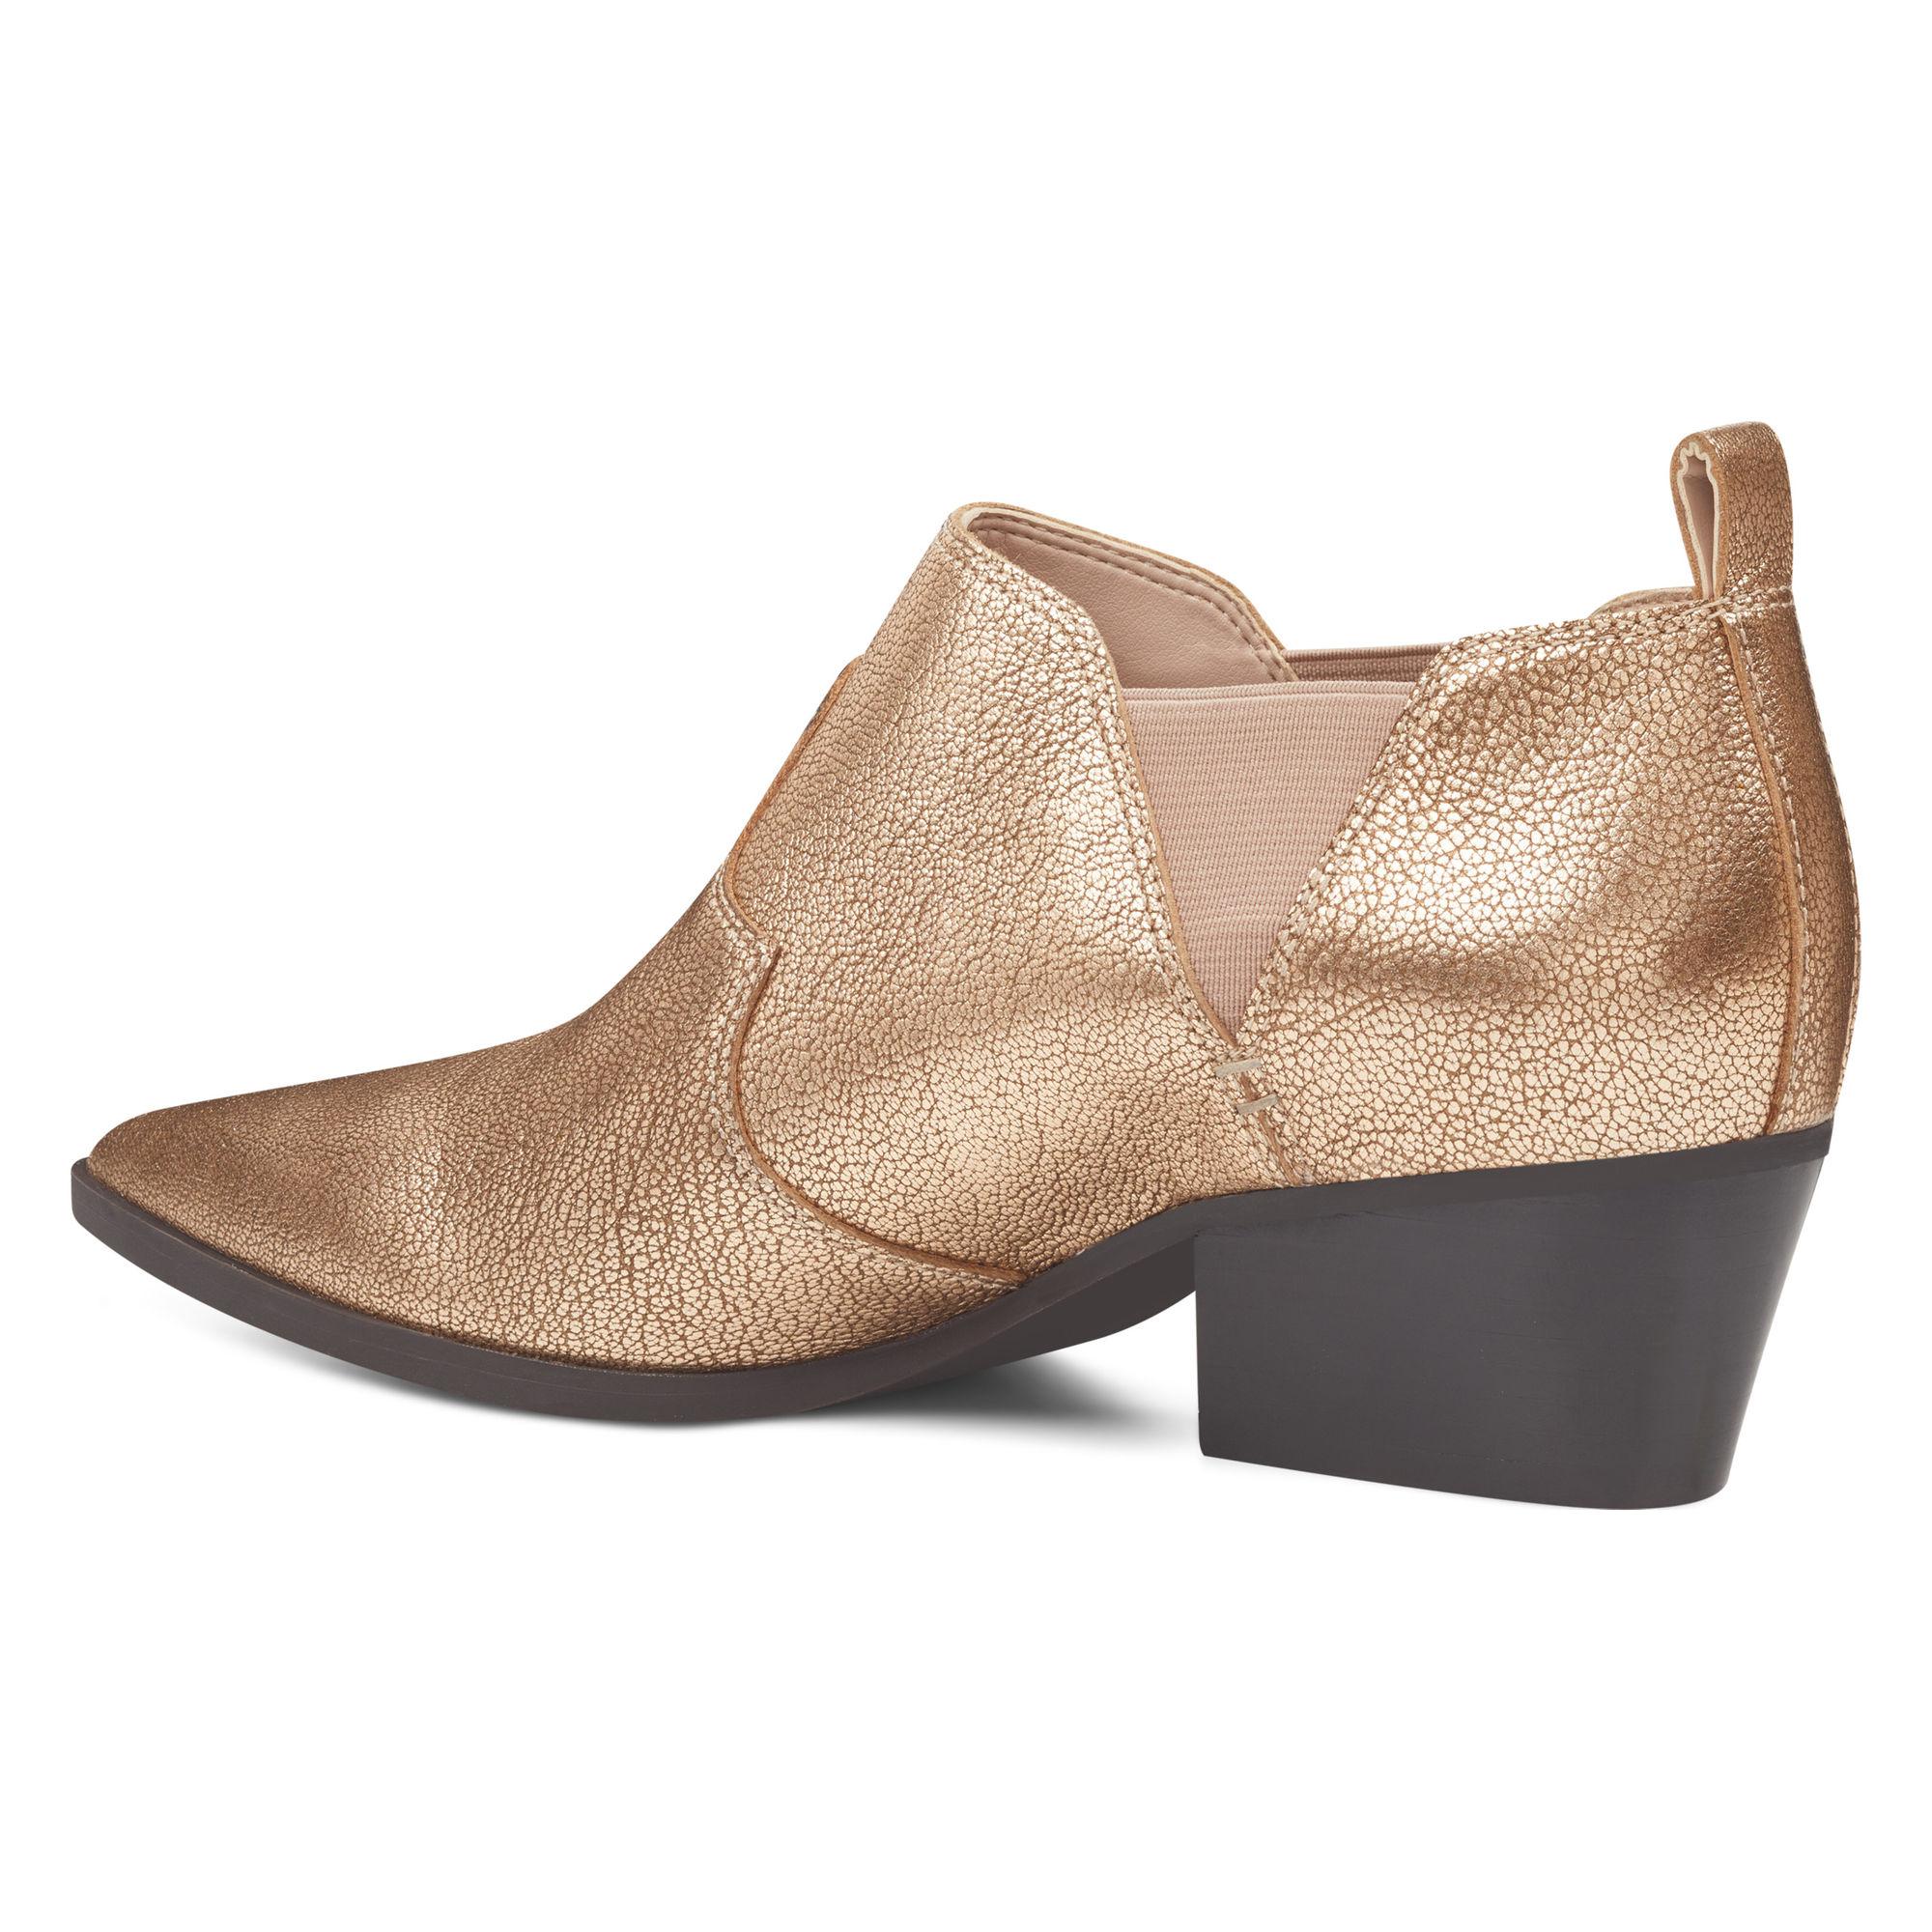 Nine West Leather Cahluz Booties in 